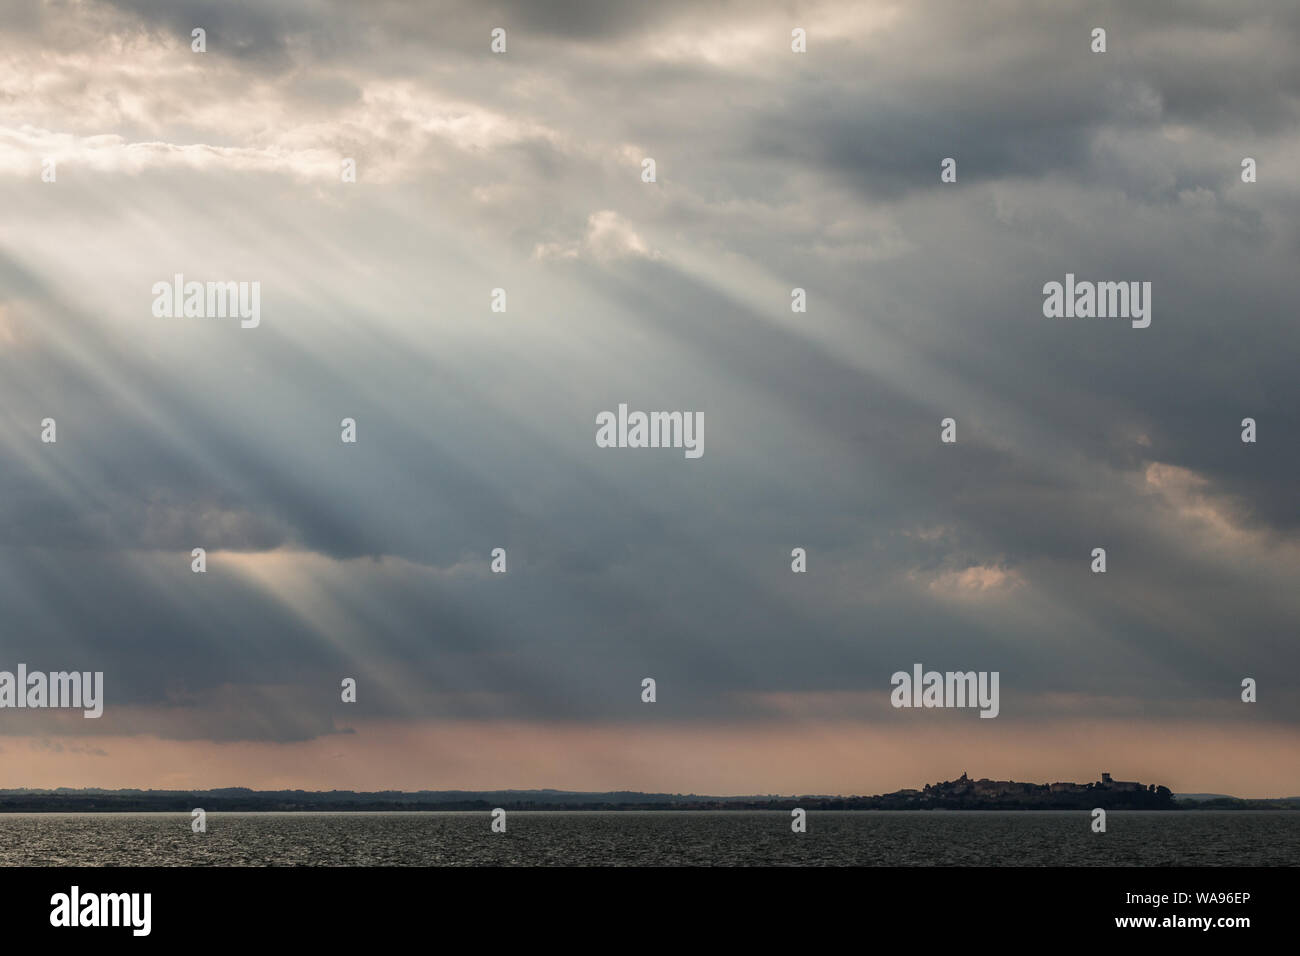 Sunrays at near sunset, with dark clouds in the background, an orange sky, and Trasimeno lake (Umbria, Italy) below Stock Photo